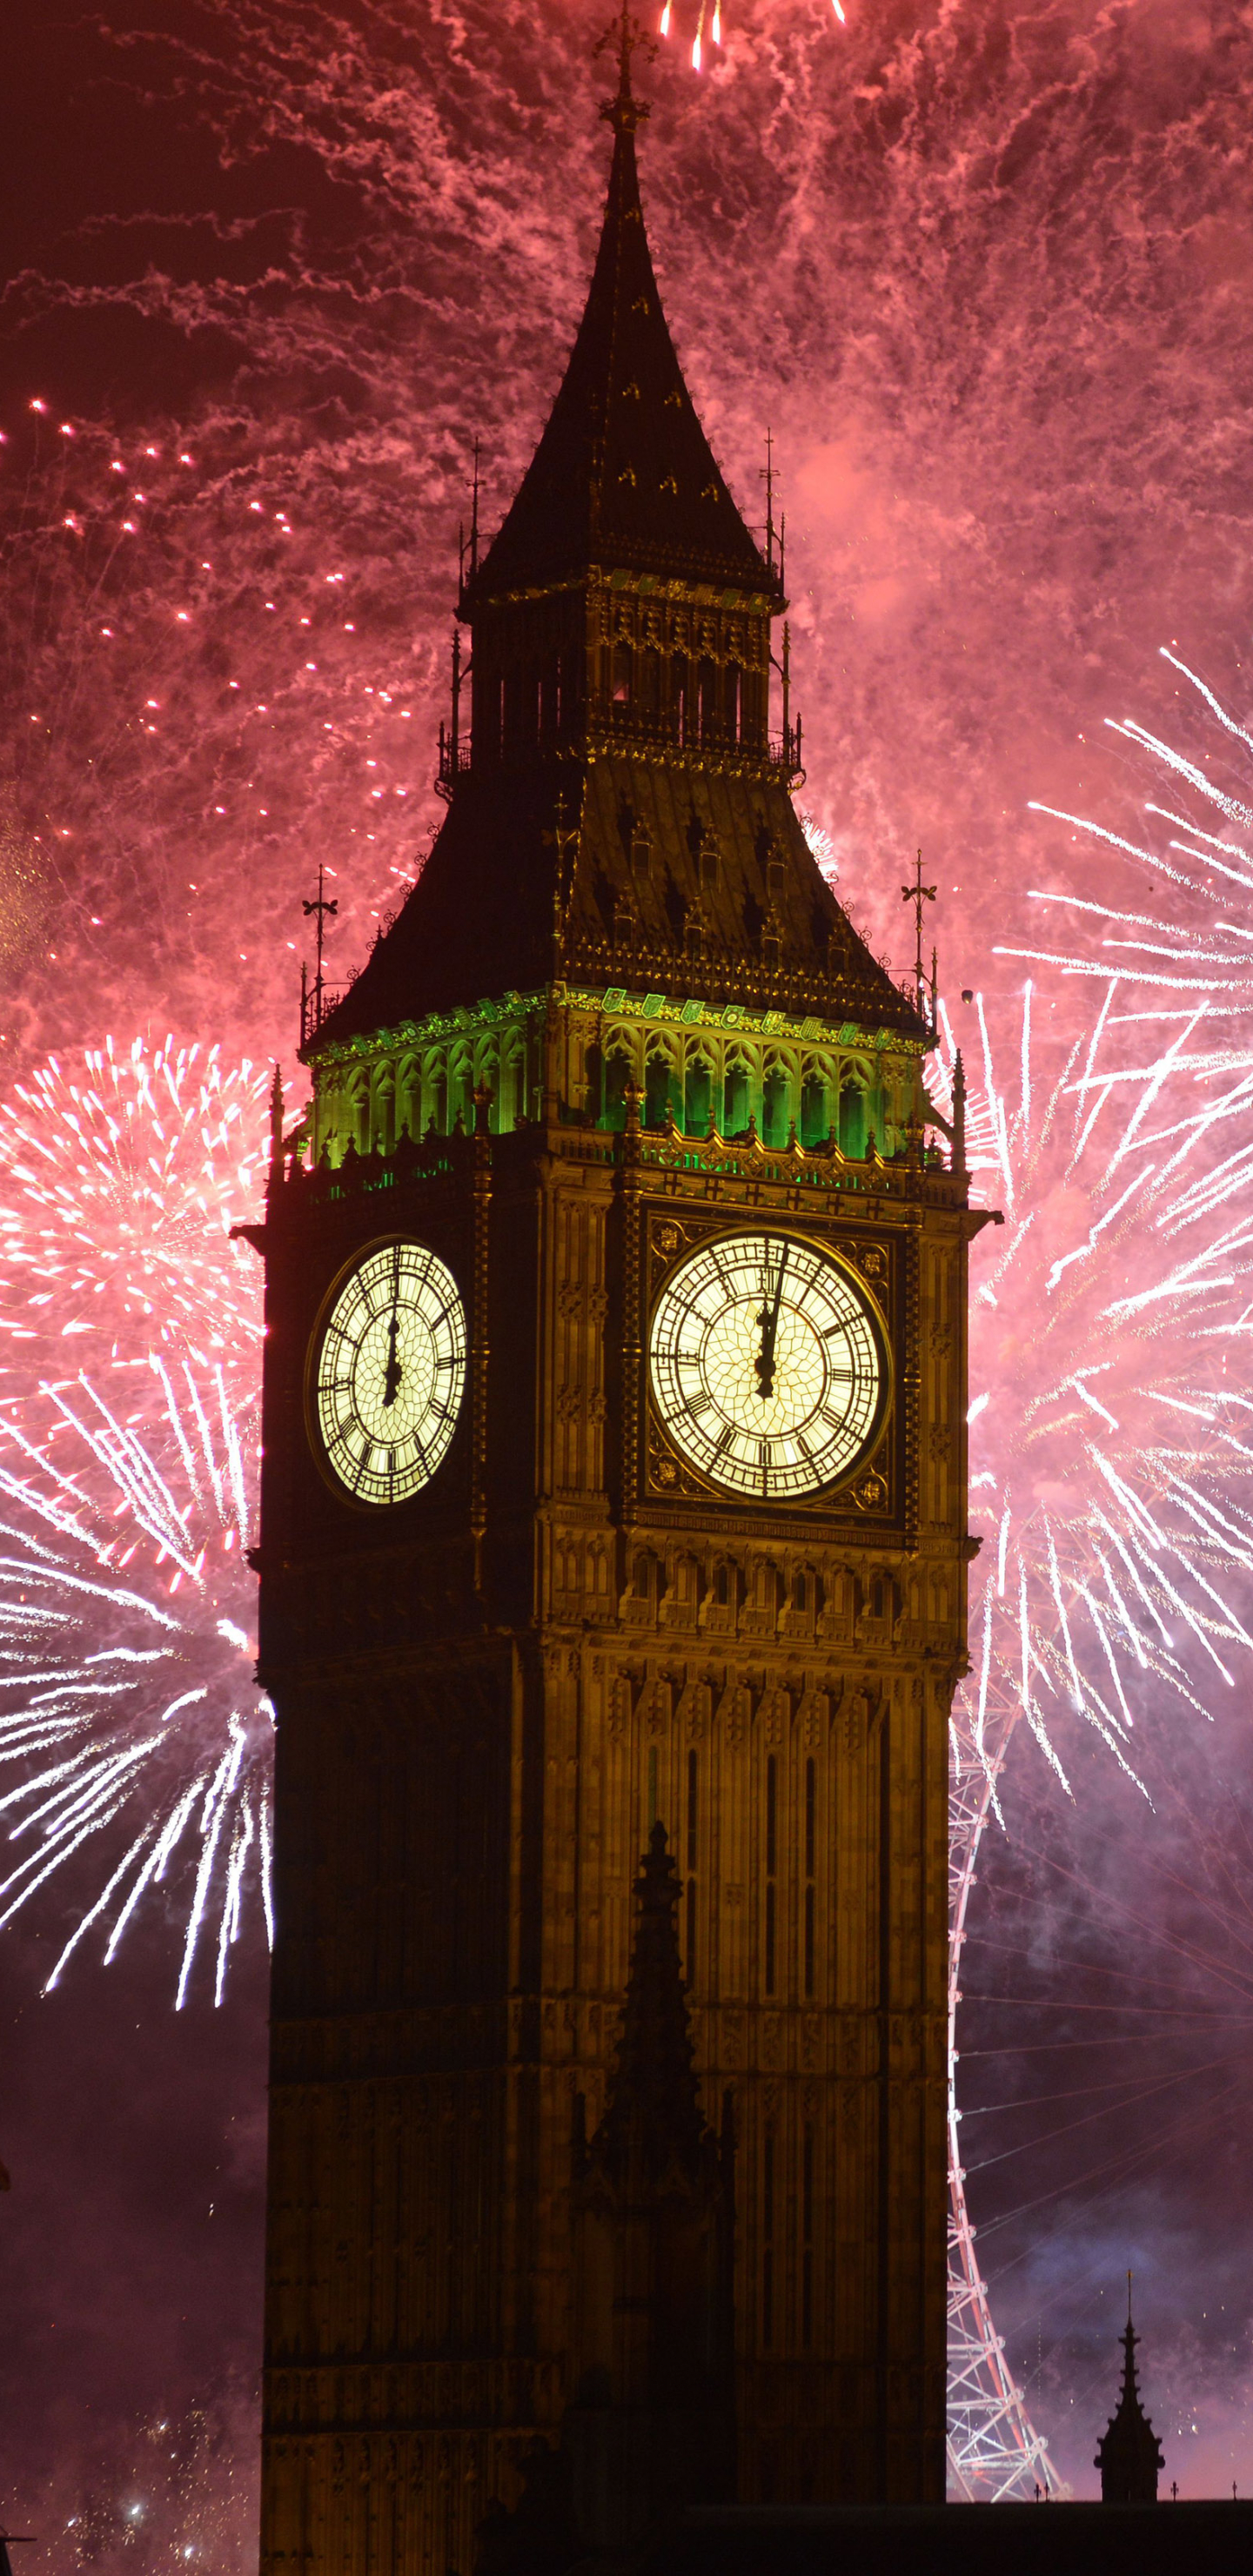 New Year's Eve Fireworks over London